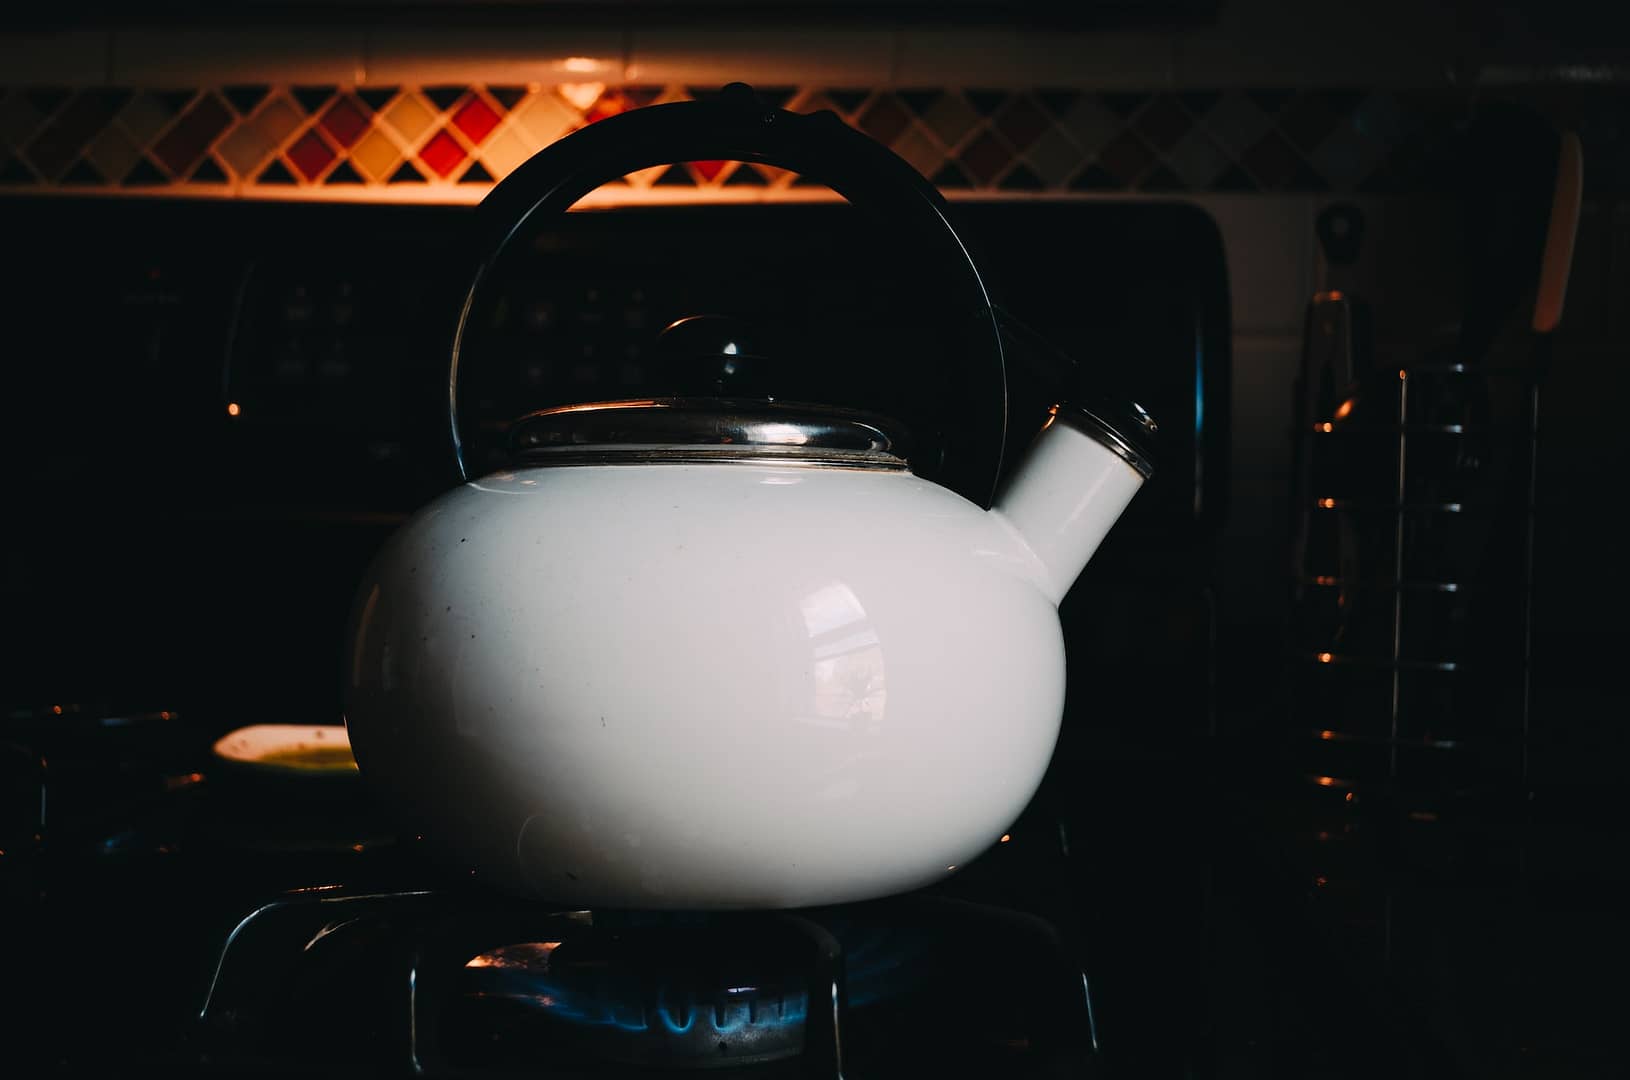 A white kettle being heated on a gas stove